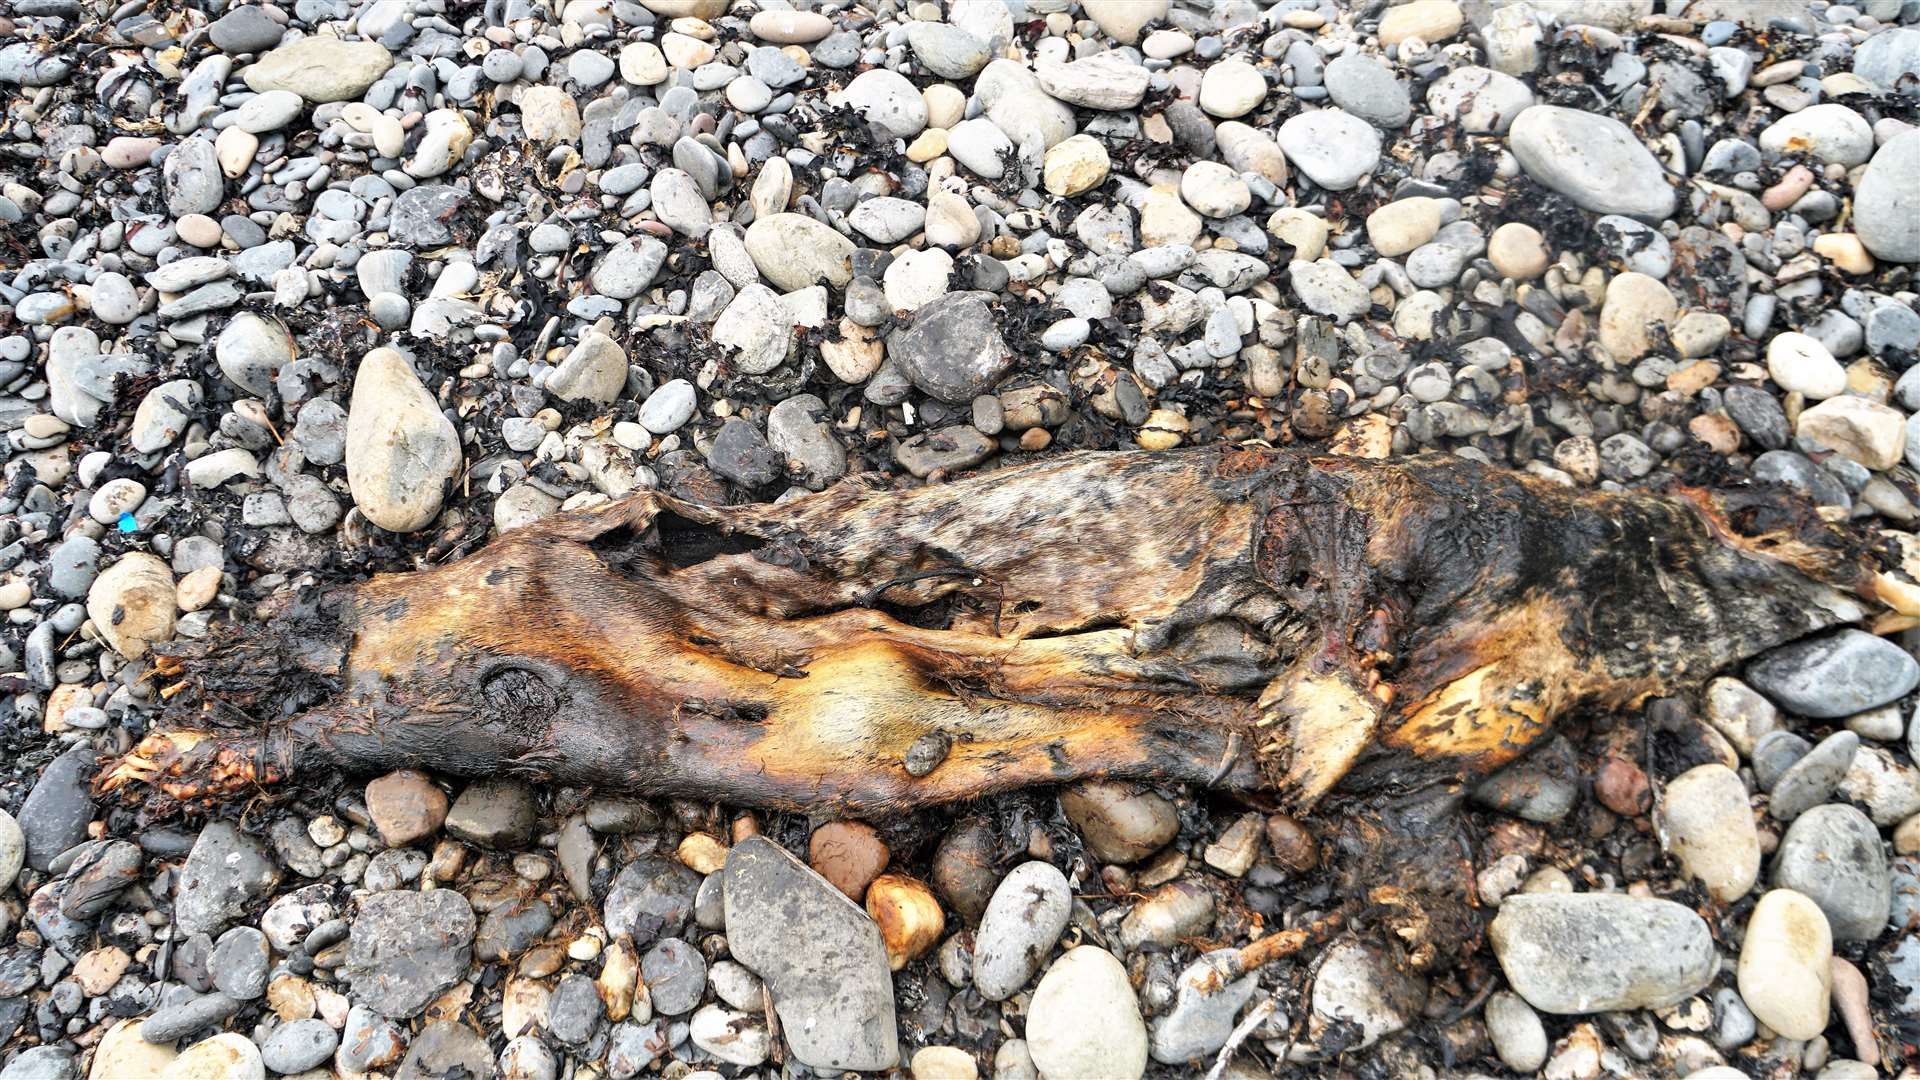 A seal carcass was also on the beach. The association of avian viruses with influenza outbreaks in seals suggests that 'transmission of avian viruses to seals' is occurring in nature, said one study. Picture: DGS